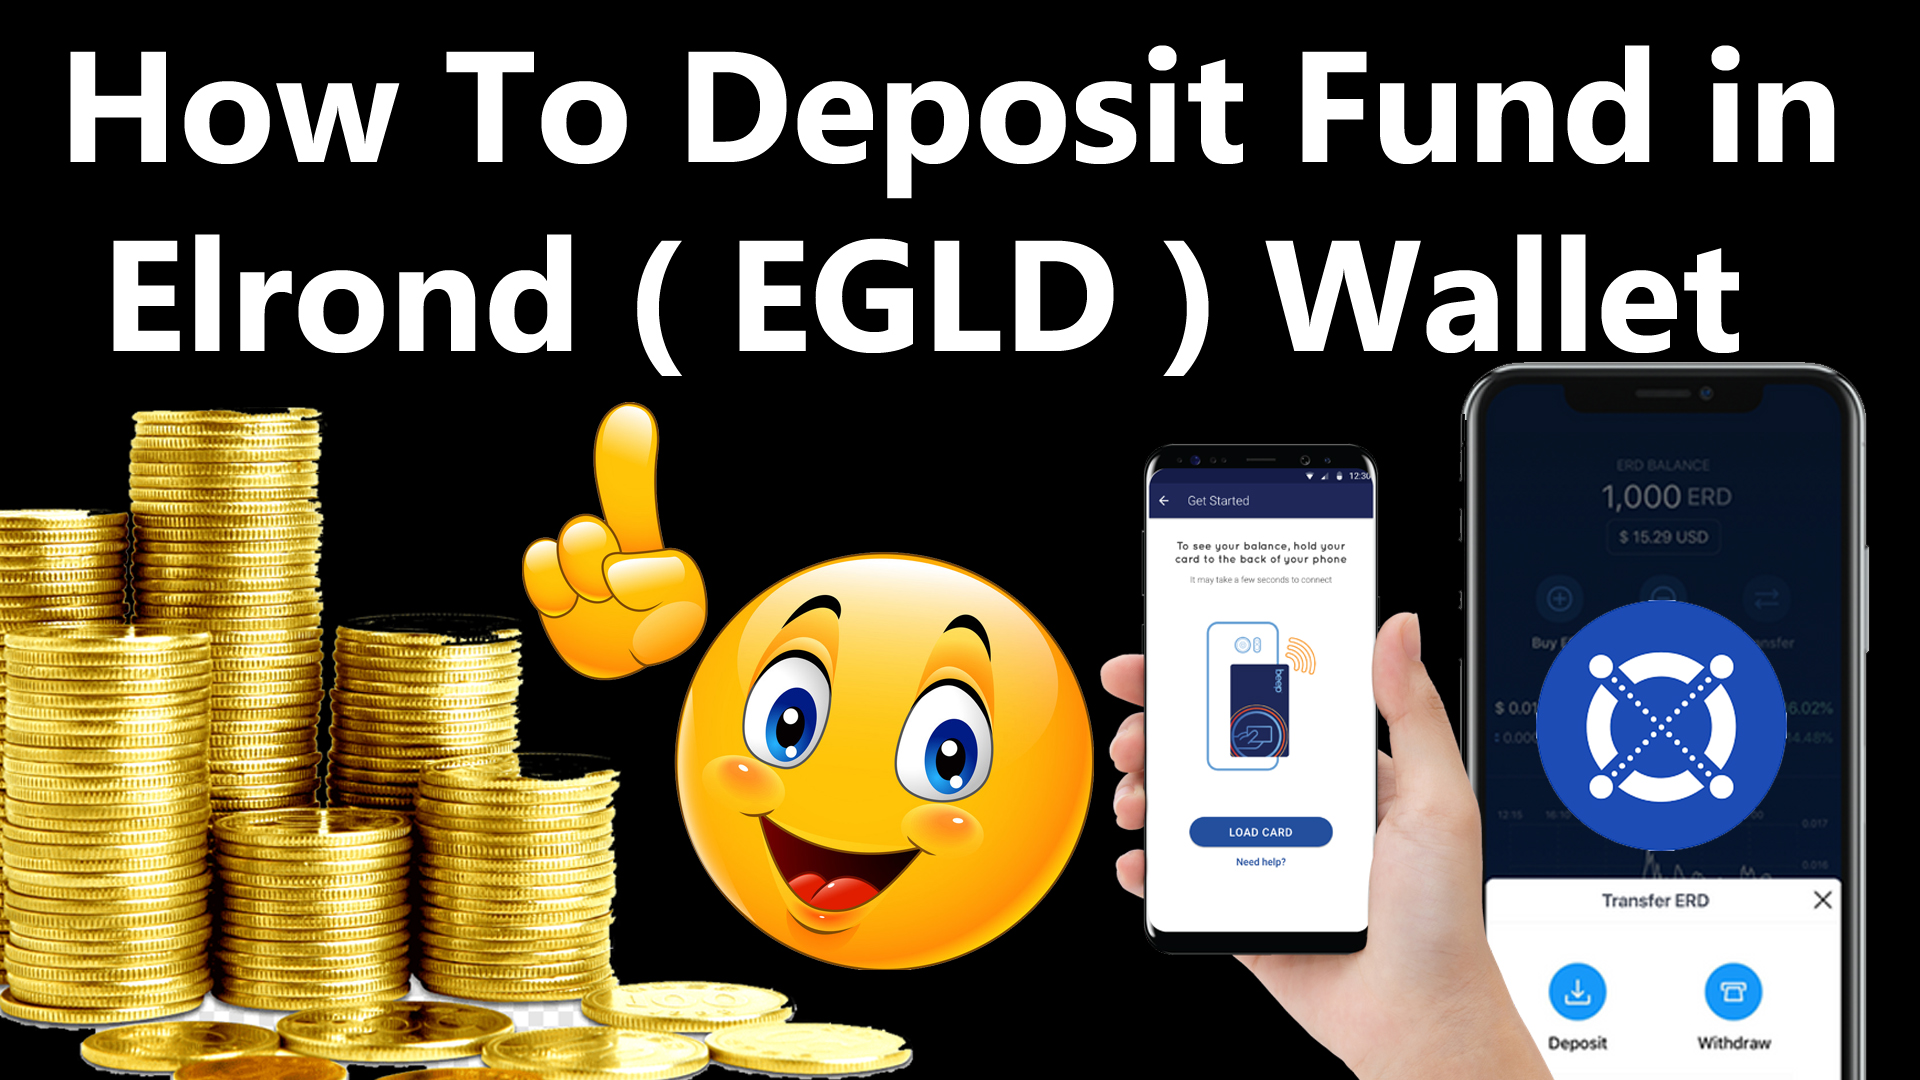 How To Deposit Fund in Elrond ( EGLD ) Wallet by Crypto Wallets Info copy.jpg